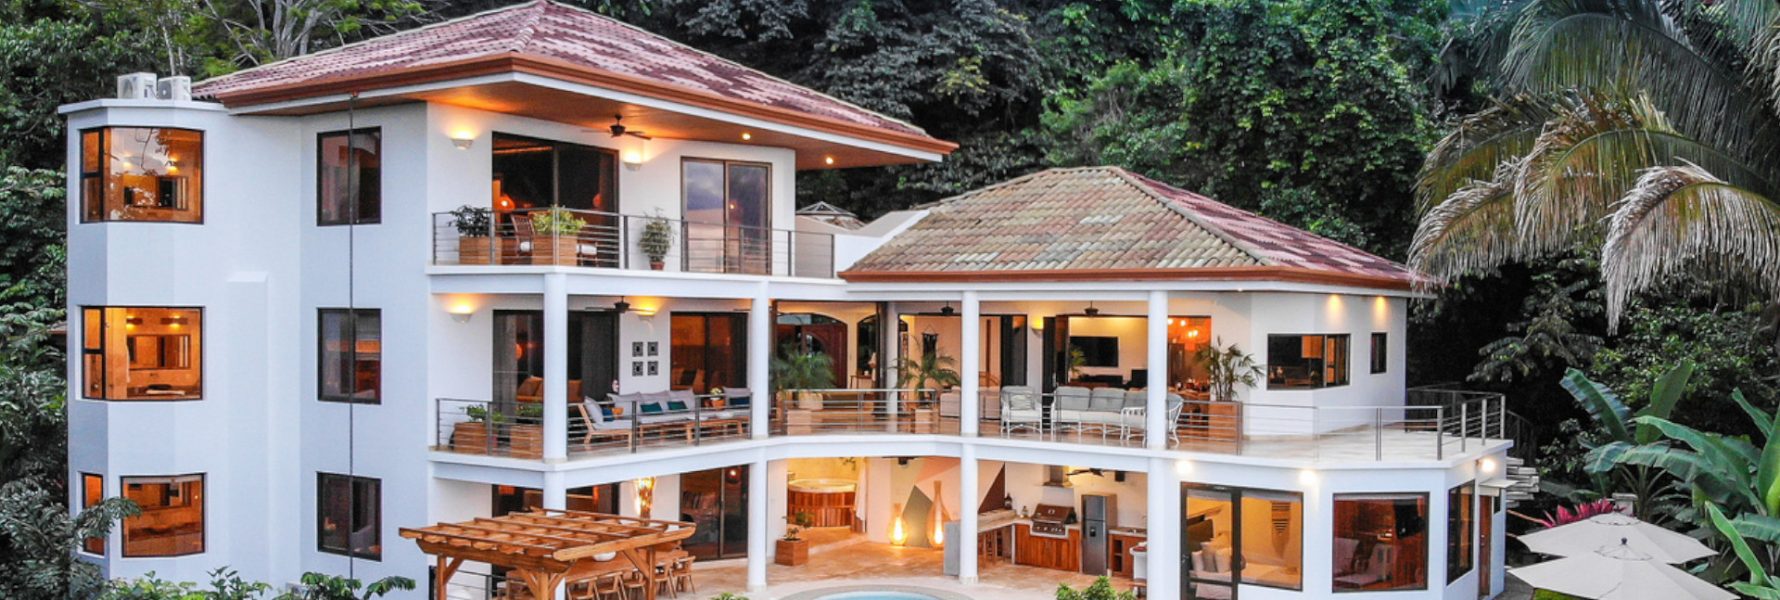 This incredible seven-bedroom villa in Manuel Antonio is designed to make the most of its breathtaking ocean view.